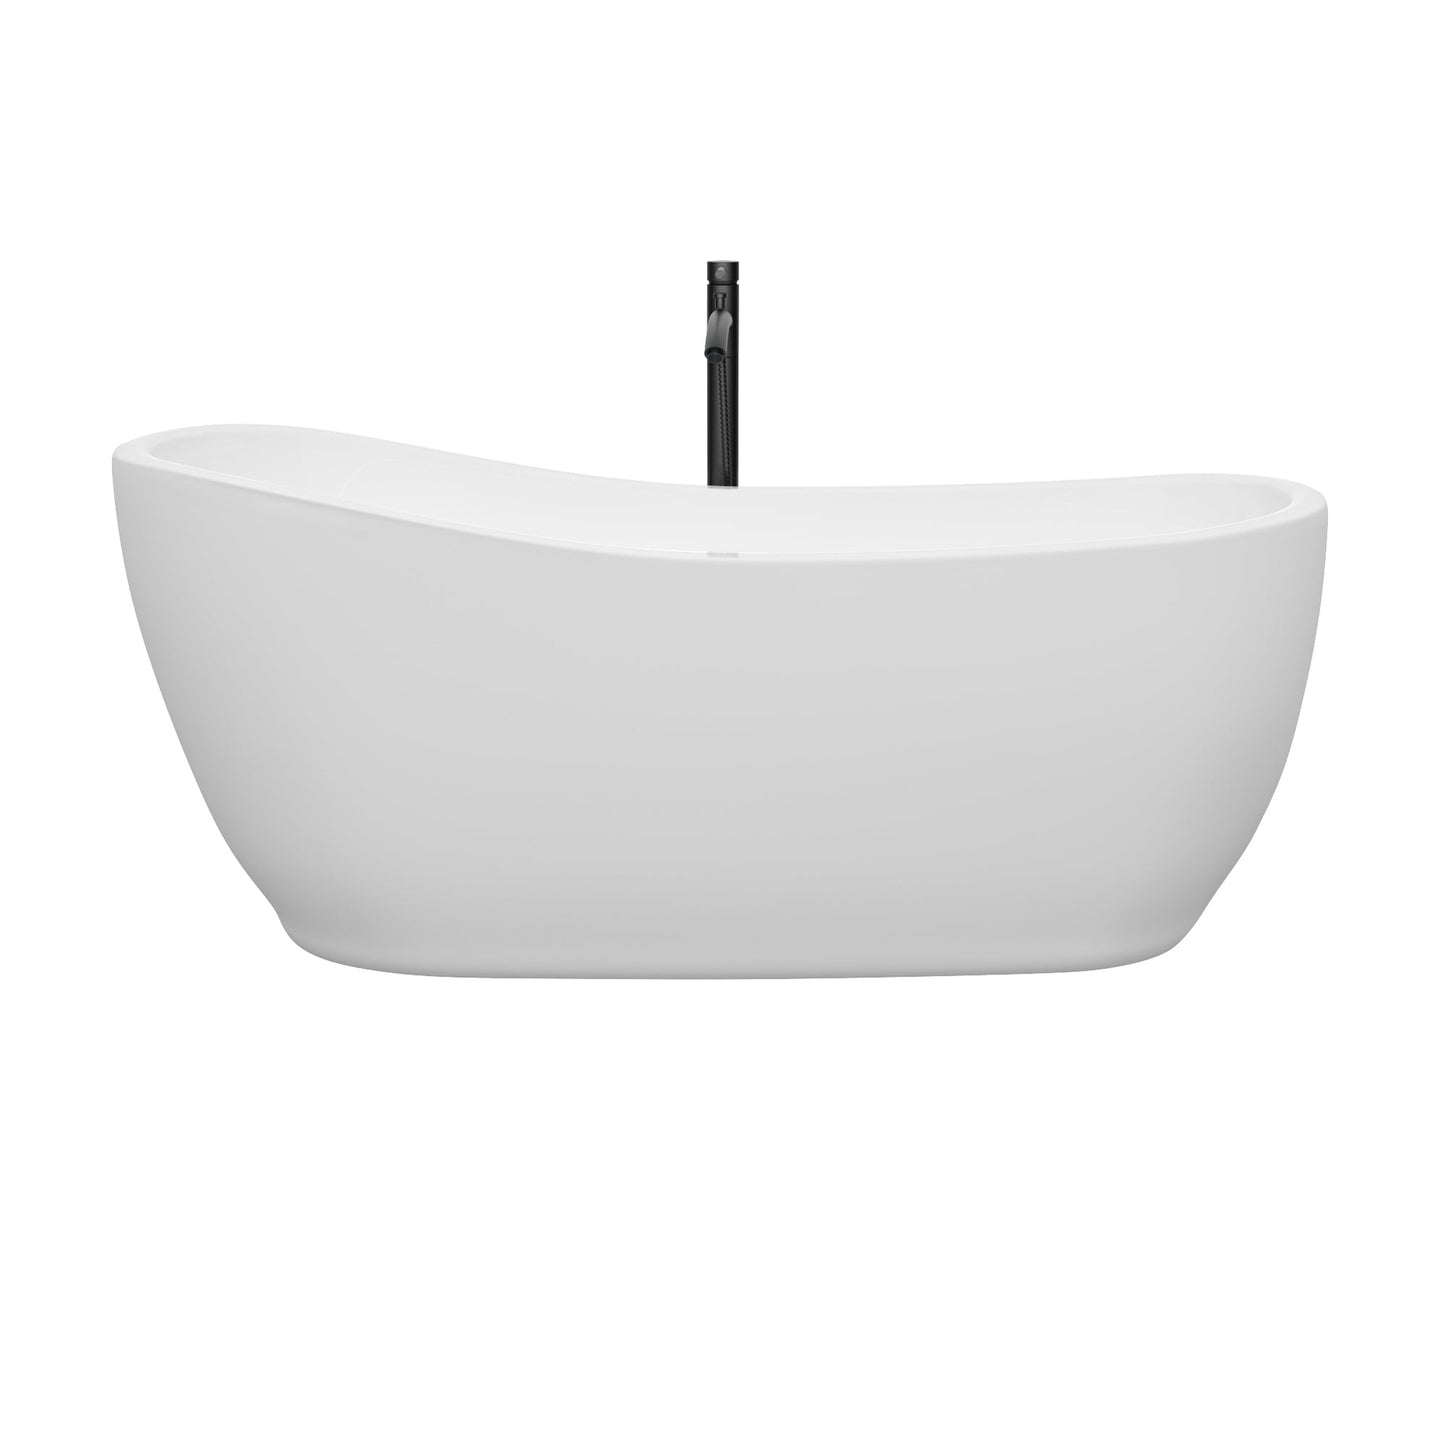 Wyndham Collection Margaret 66" Freestanding Bathtub in White With Shiny White Trim and Floor Mounted Faucet in Matte Black